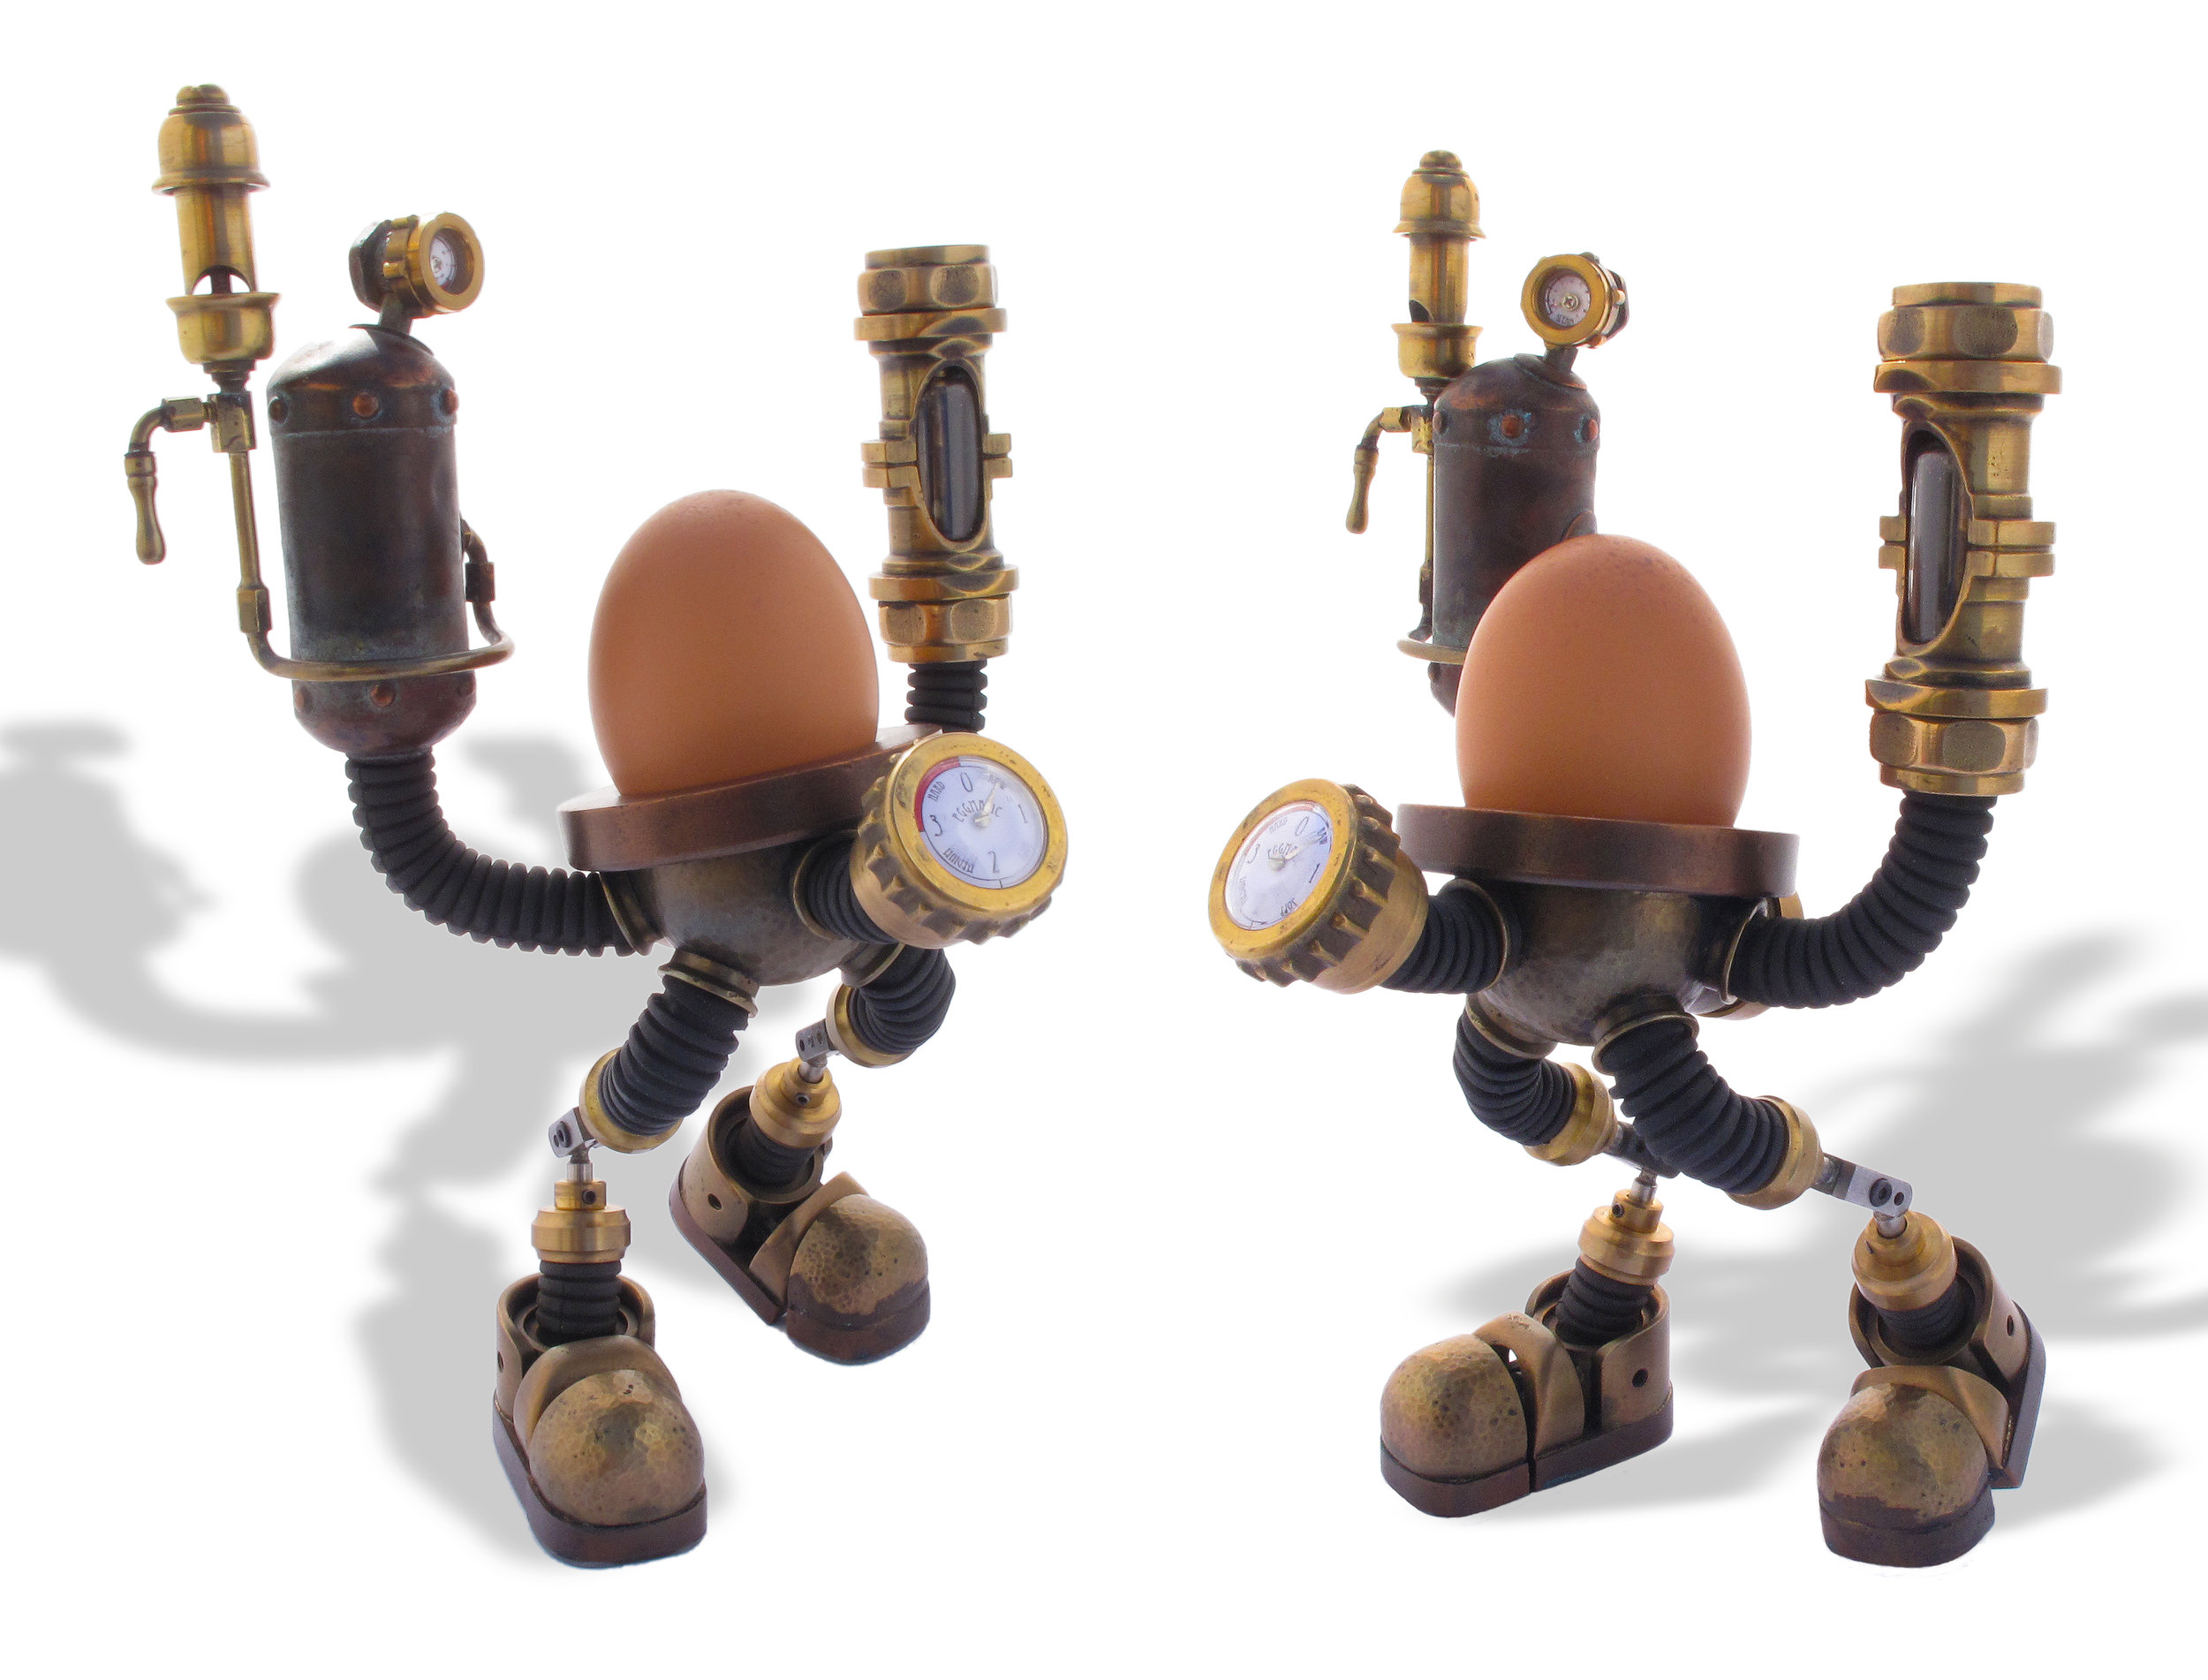  'The Eggmatic', by André Masters 